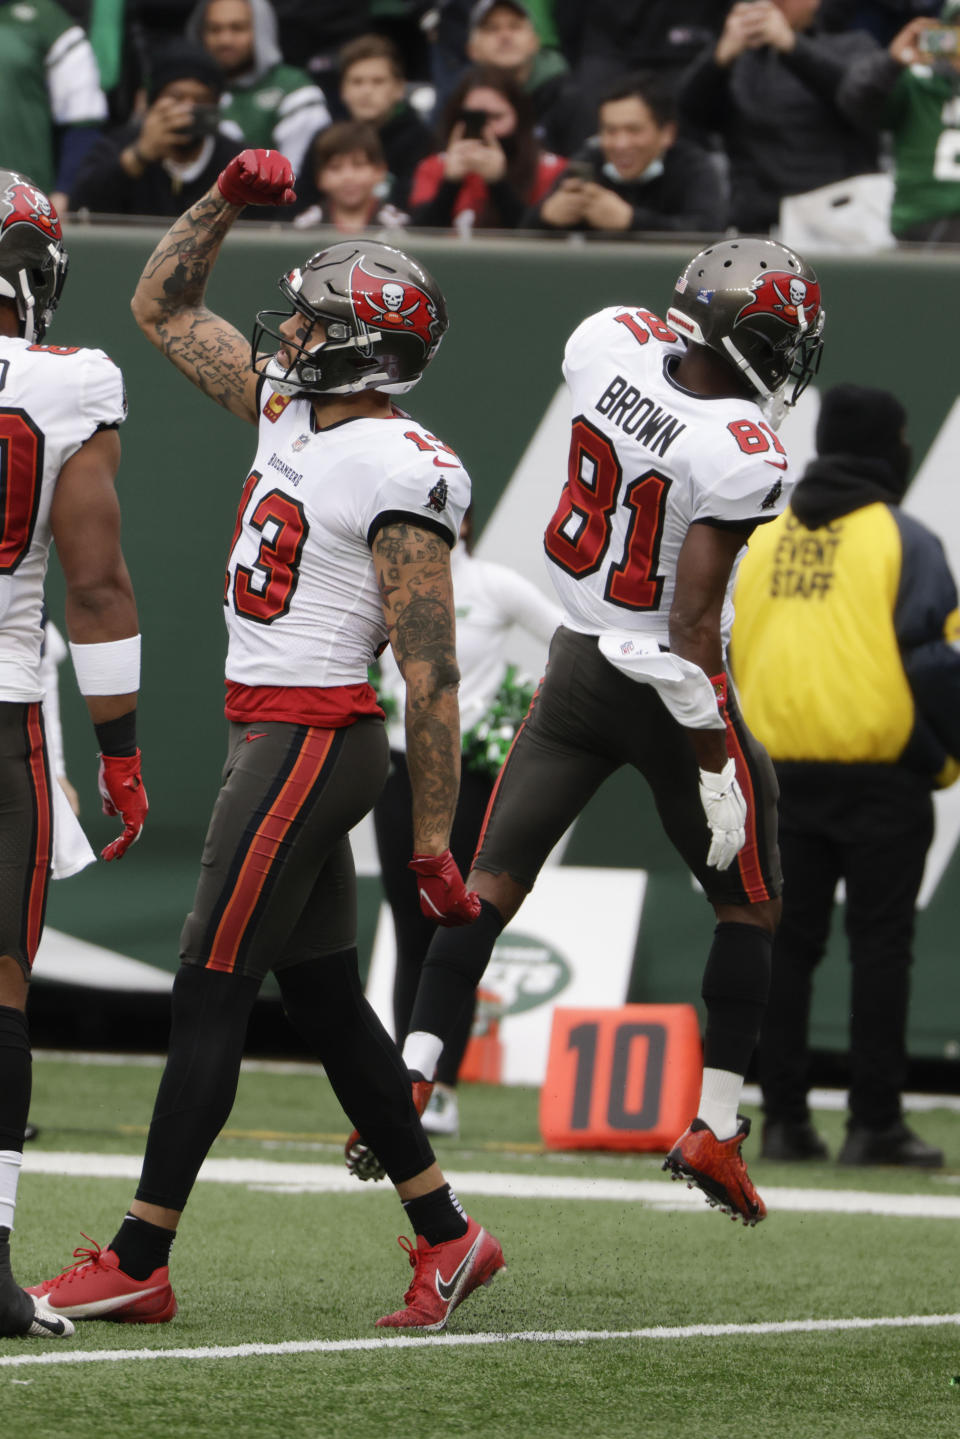 Tampa Bay Buccaneers' Mike Evans, left, celebrates his touchdown with Antonio Brown (81) during the first half of an NFL football game against the New York Jets, Sunday, Jan. 2, 2022, in East Rutherford, N.J. (AP Photo/Corey Sipkin)